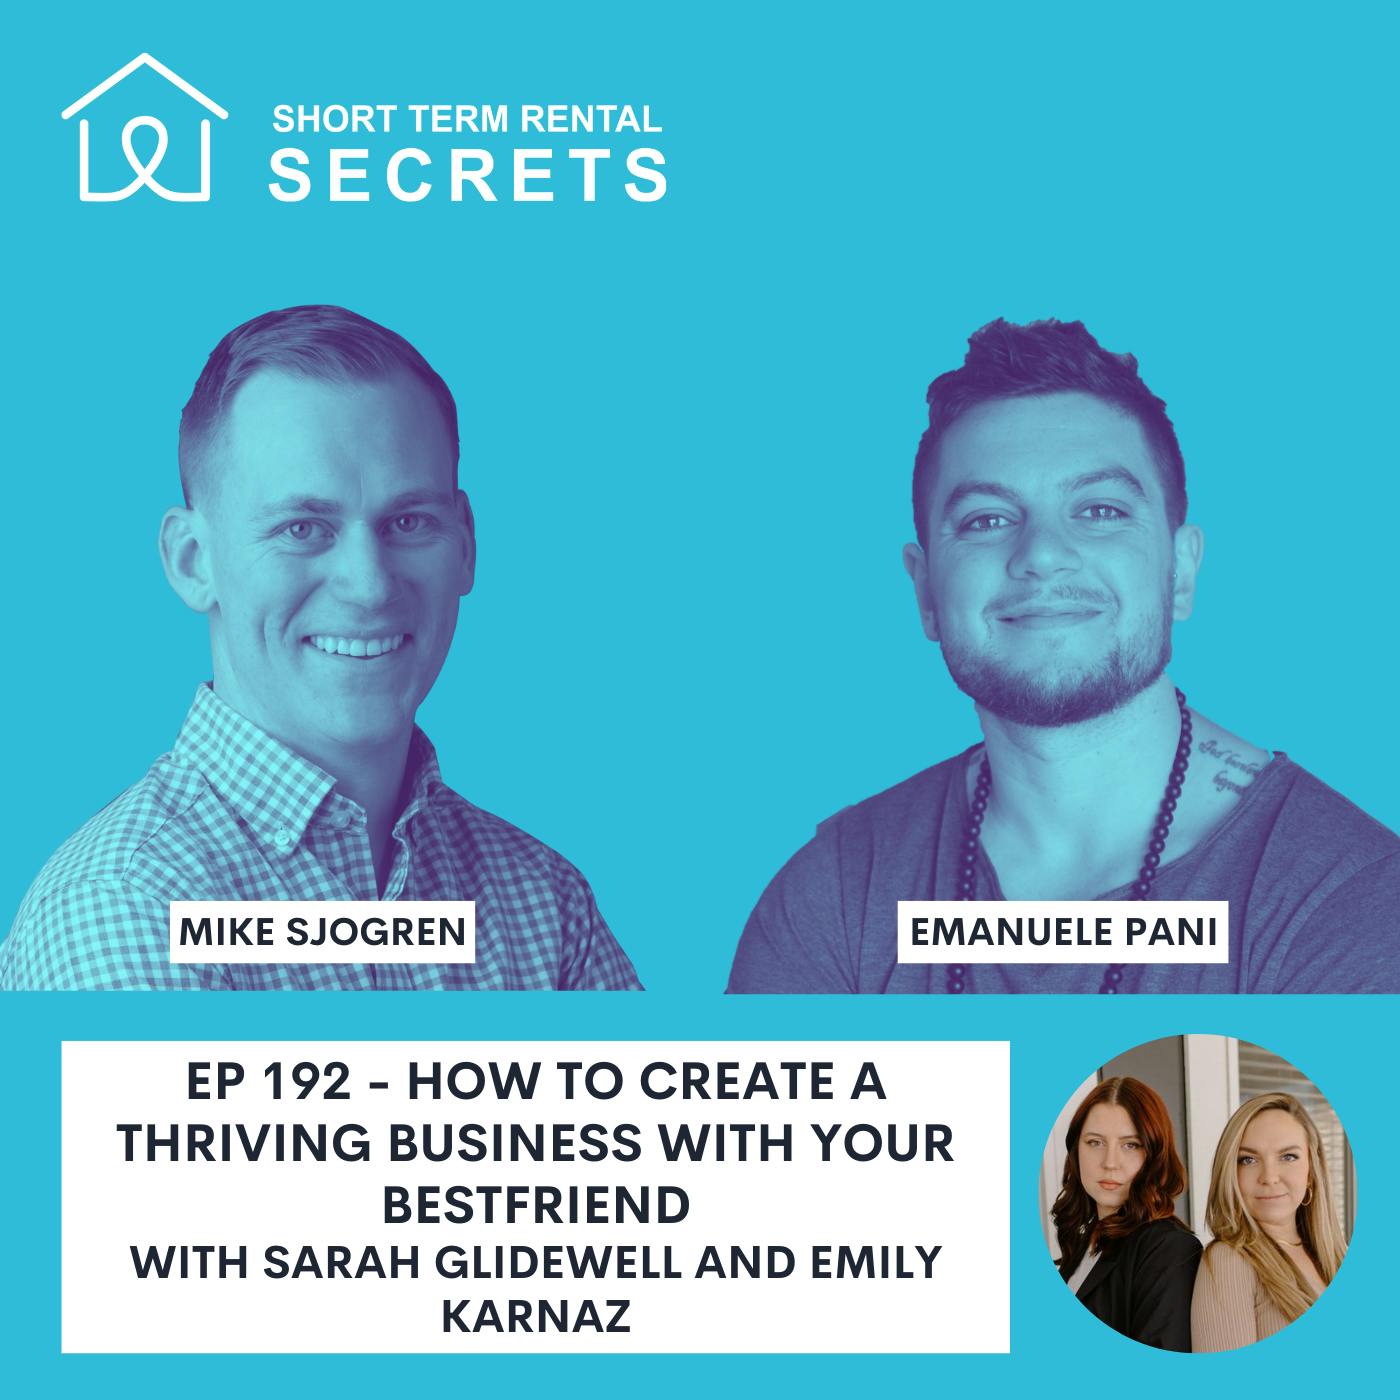 Ep 192 - How to Create a Thriving Business with your Best Friend with Sarah Glidewell and Emily Karnaz